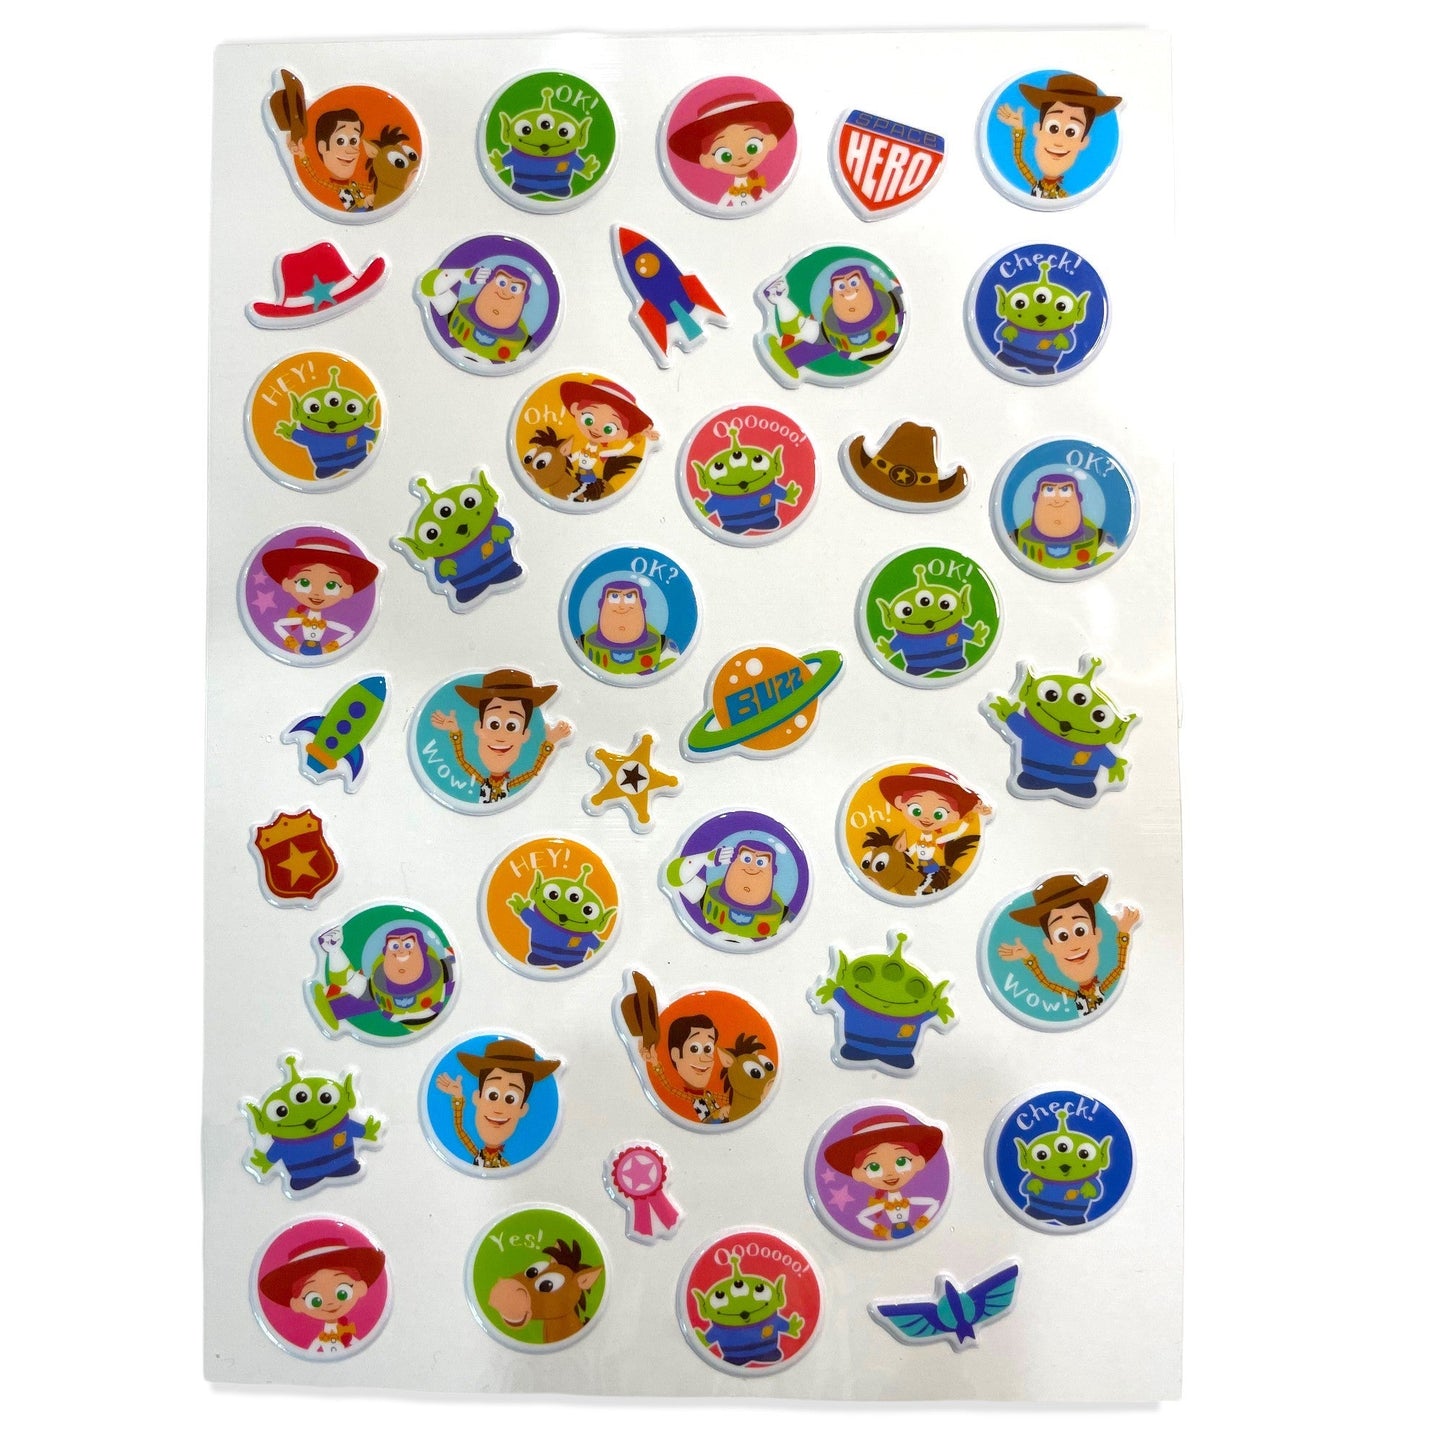 Toy Story Puffy Stickers - 30 Count